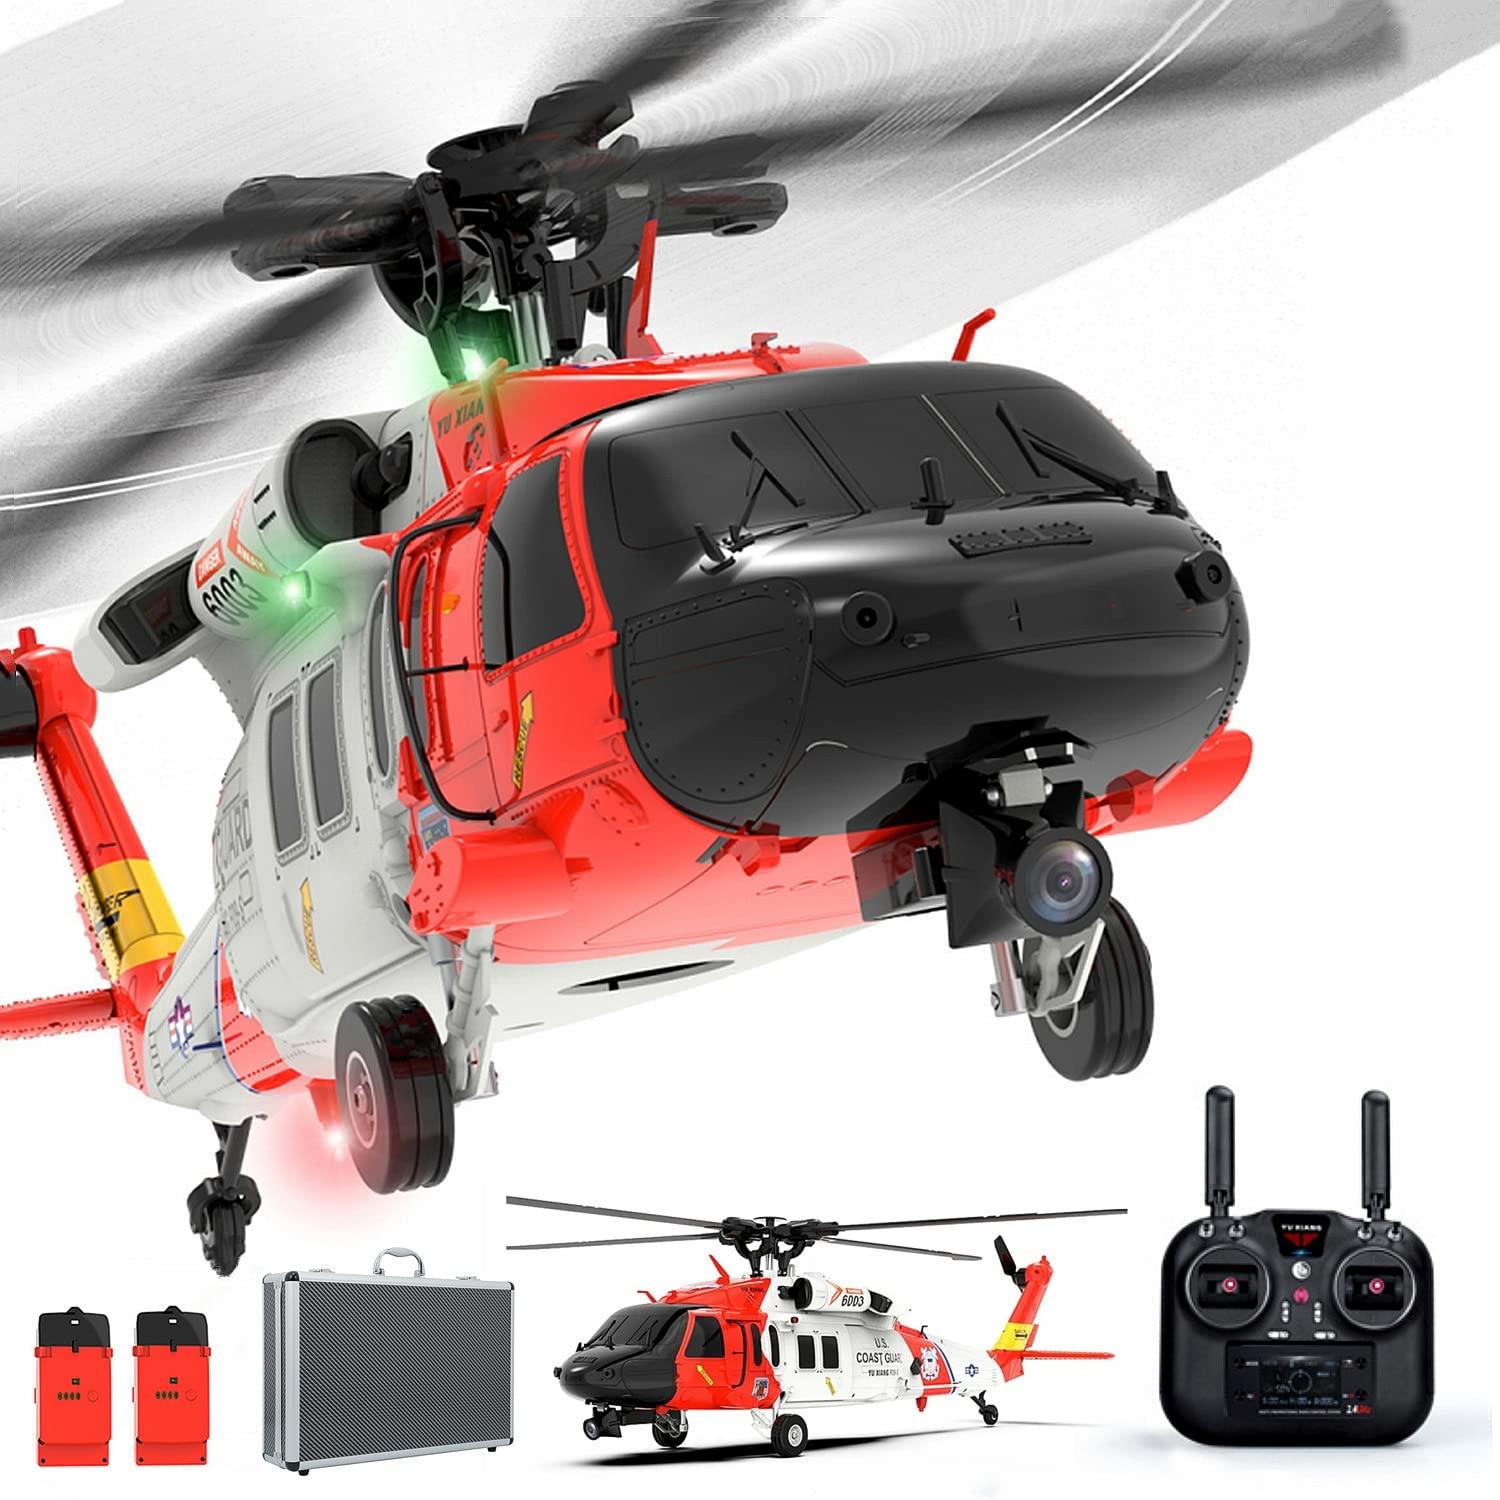 Remote Control Rc Helicopter Price: Maximizing Your RC Helicopter Budget